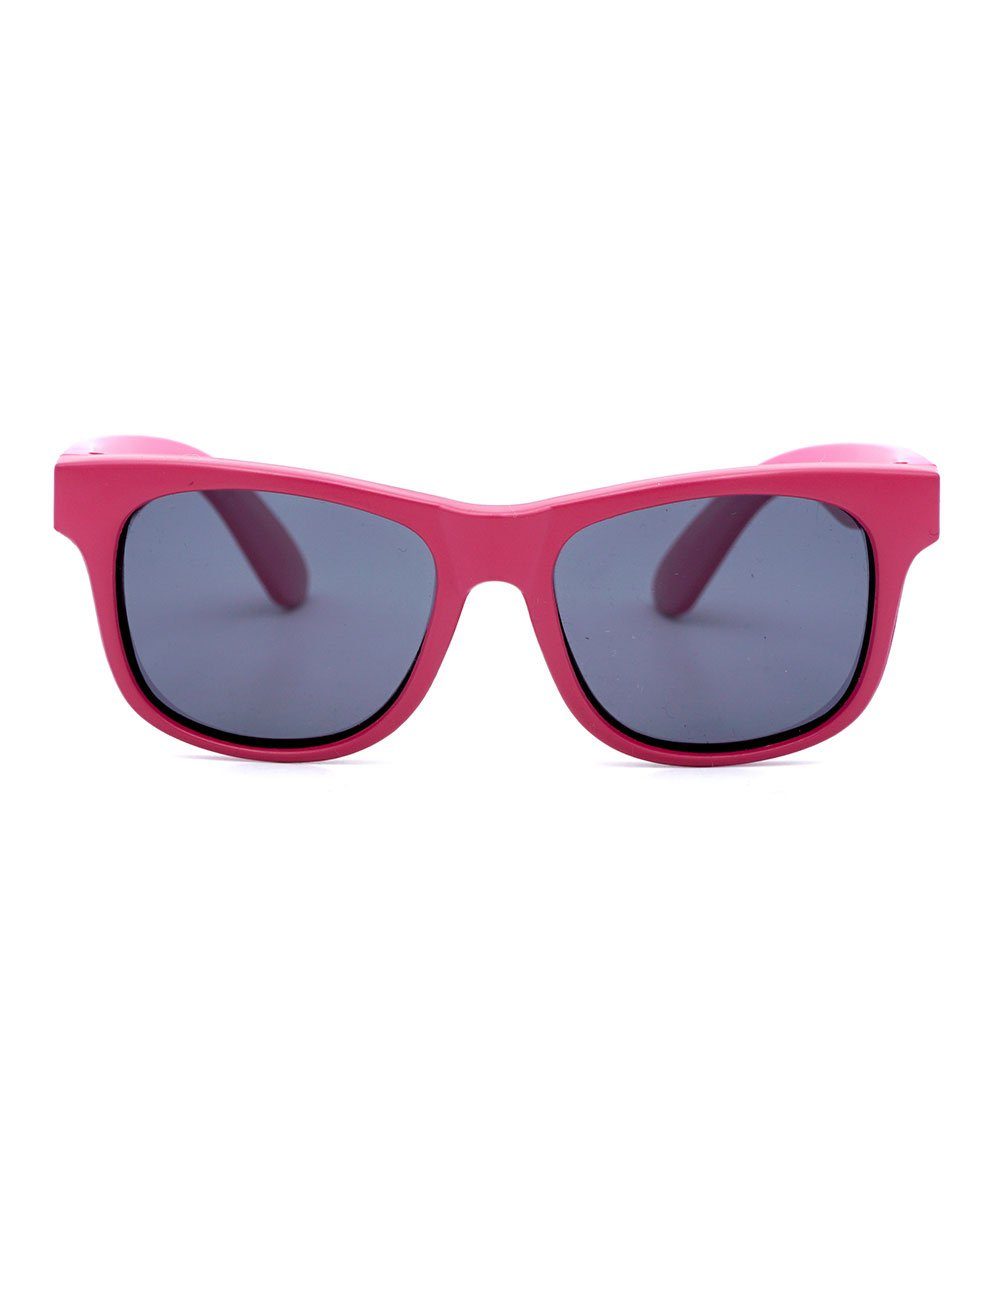 MAXIMO Sonnenbrille KIDS-Sonnenbrille 'classic', inkl.Box,Microfaserb berry/pink